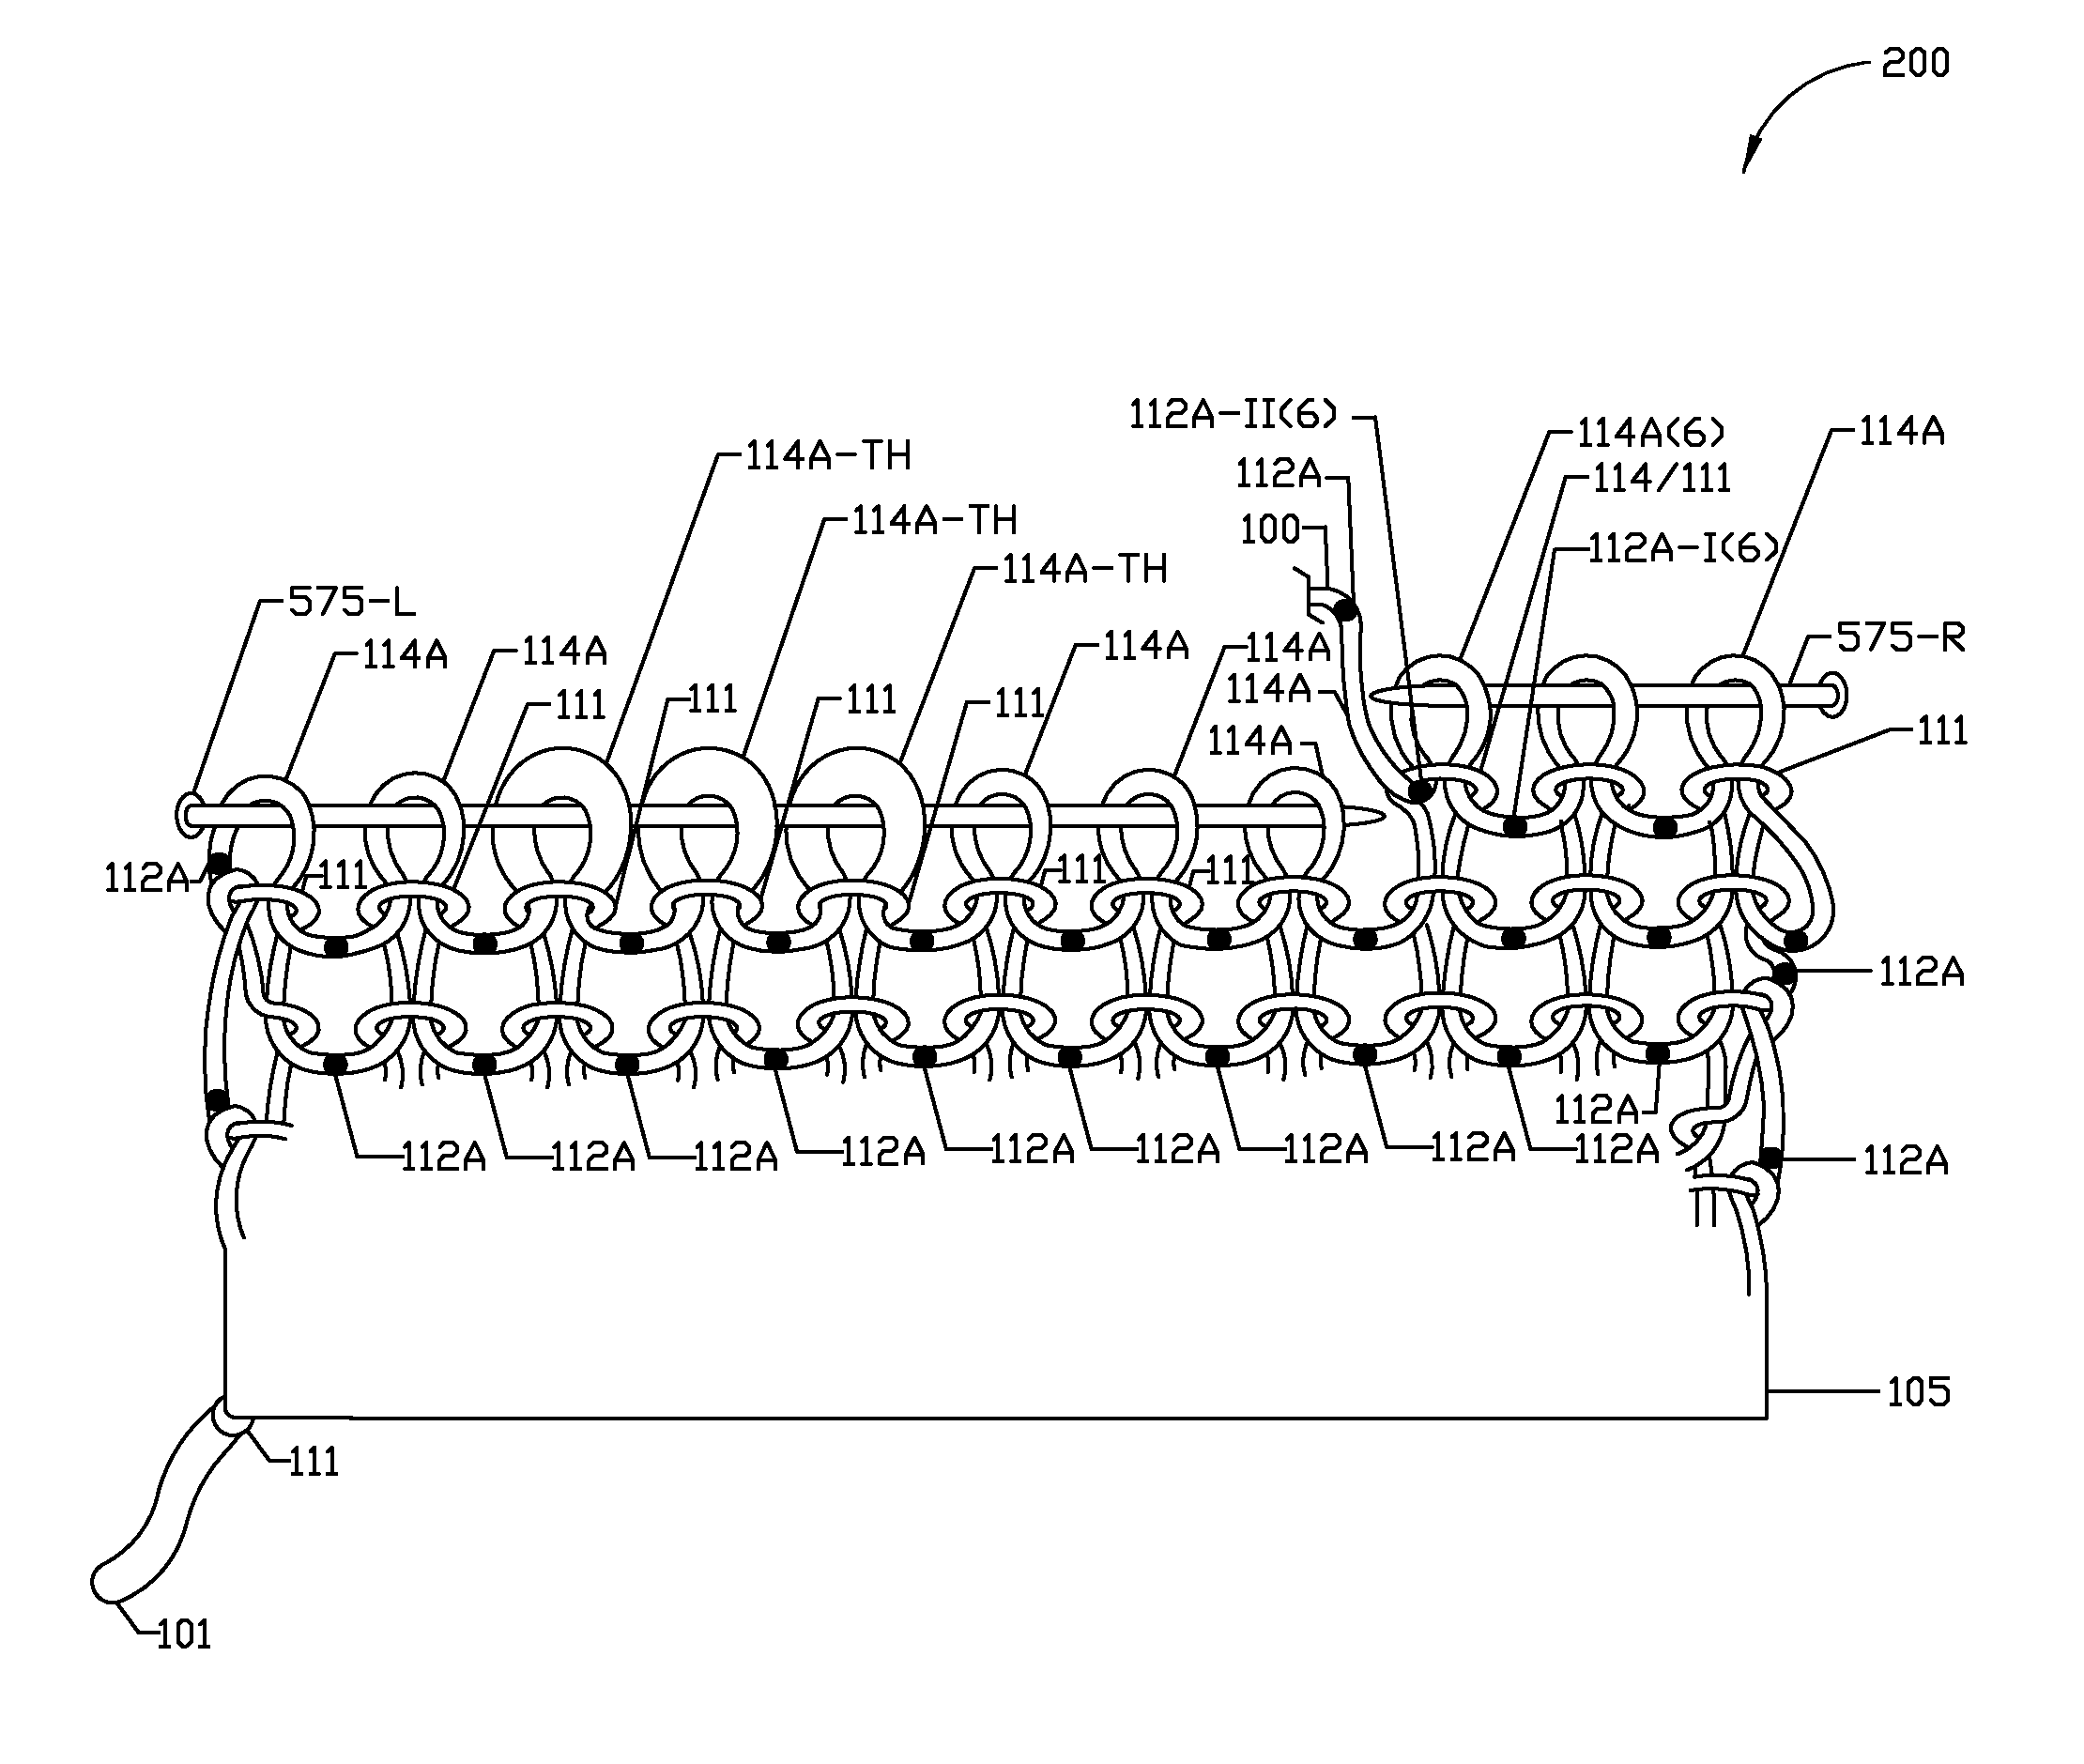 System and method for forming a design from a flexible filament having indicators